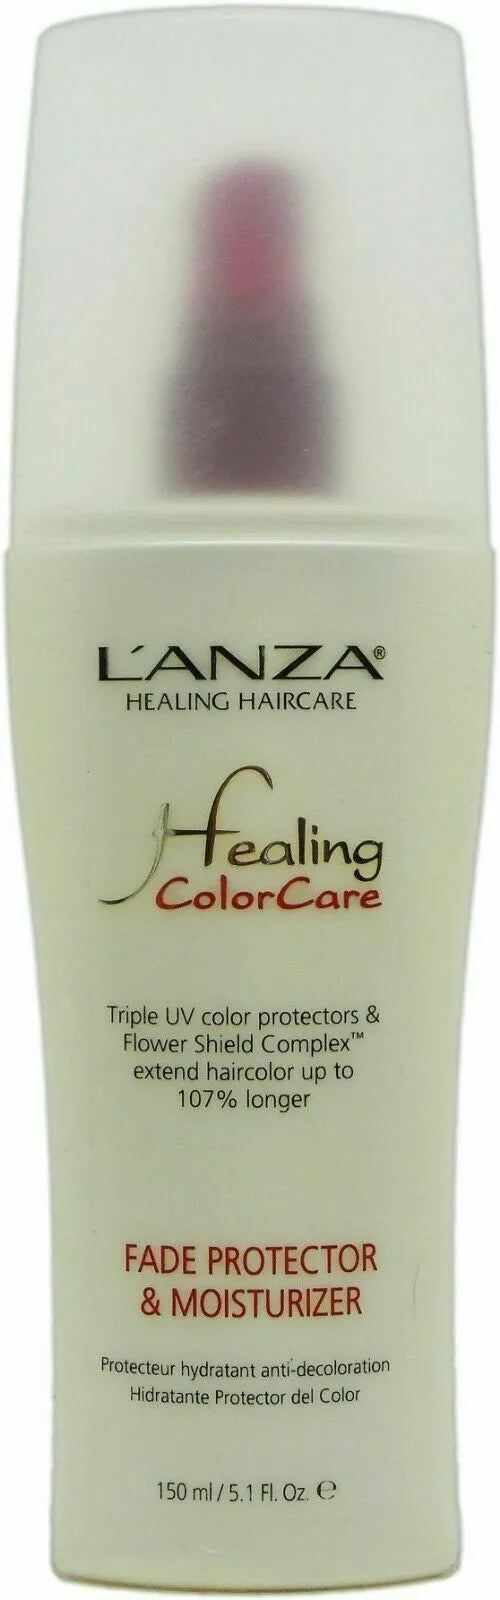 L'anza Healing Color Care Fade Protector and Moisturizer image of 5.1 oz bottle